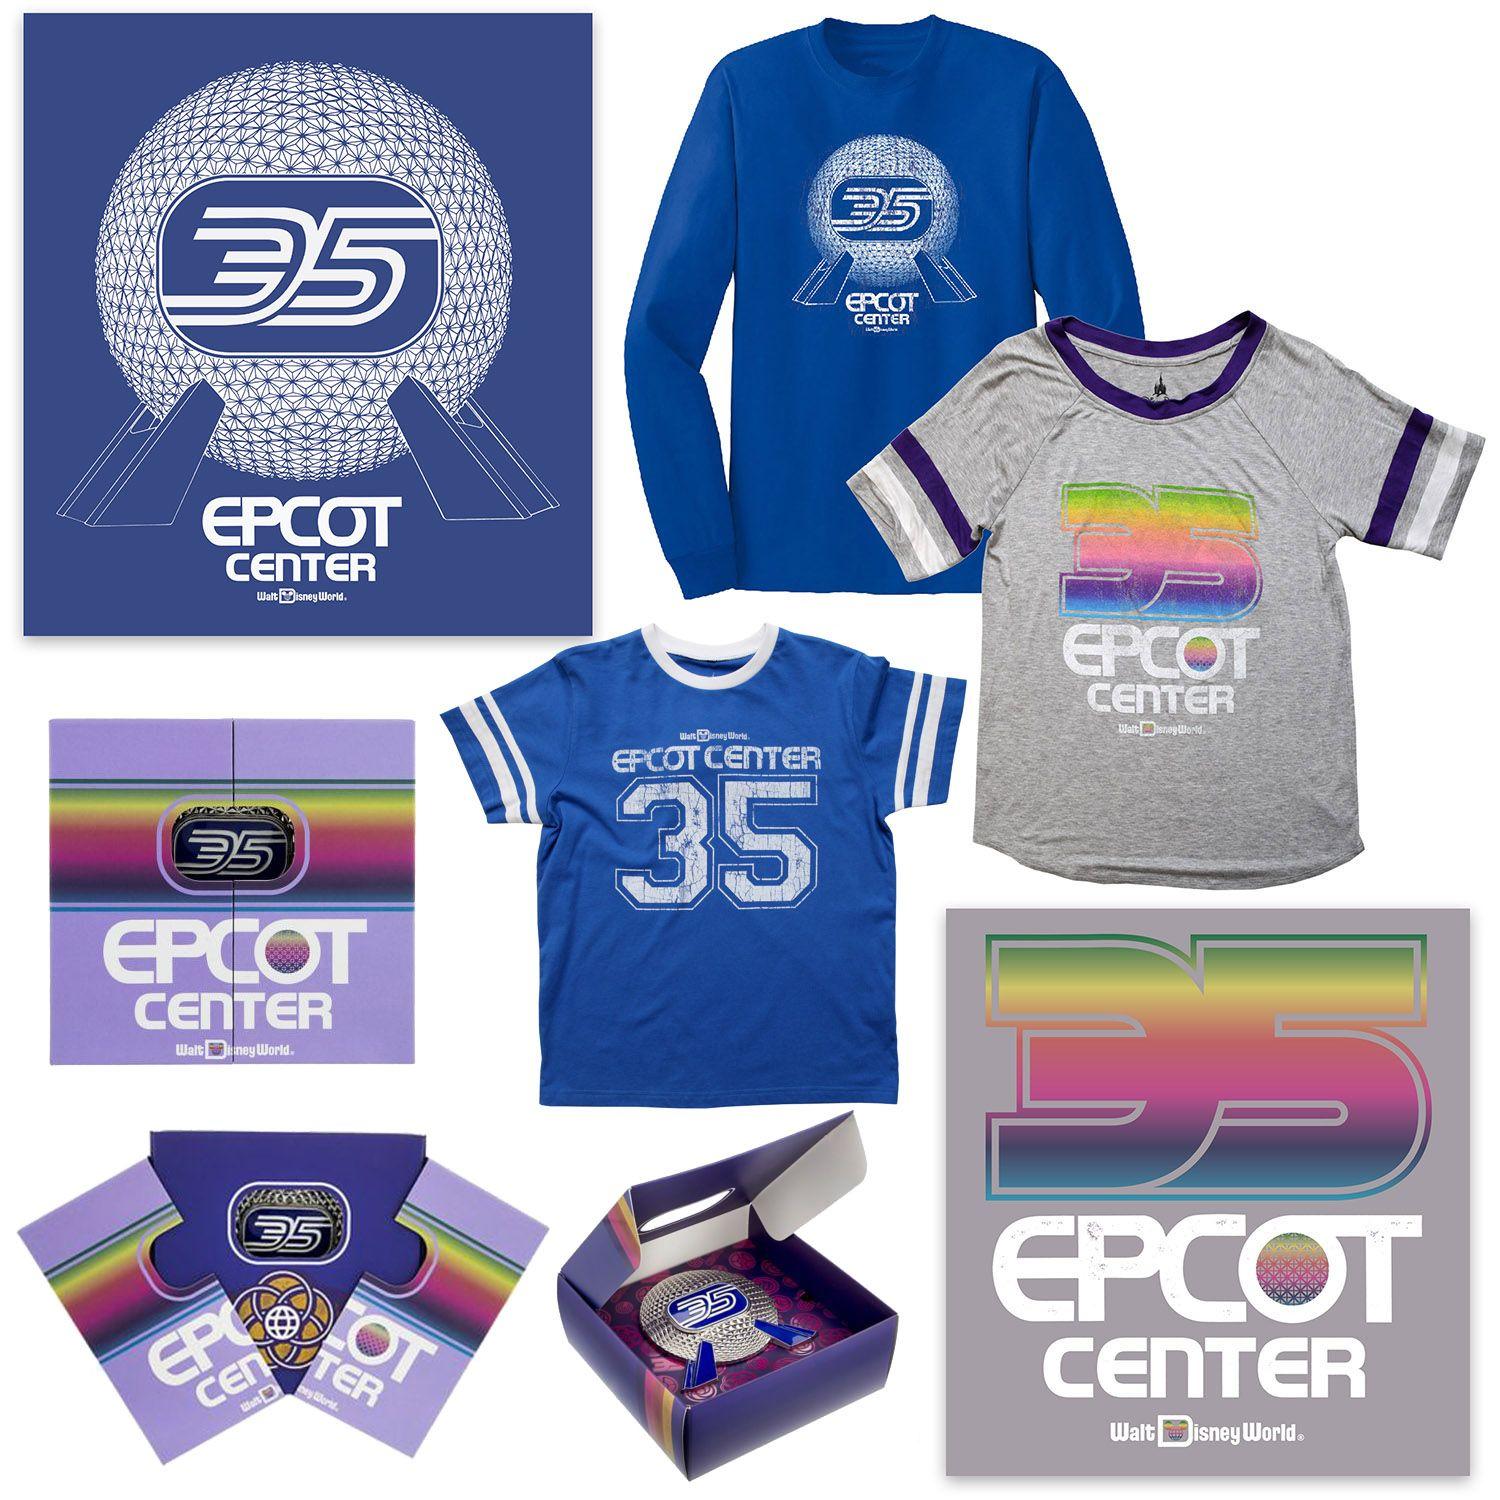 Epcot Logo - Begin To Dream With Retro Inspired Merchandise For 35th Anniversary